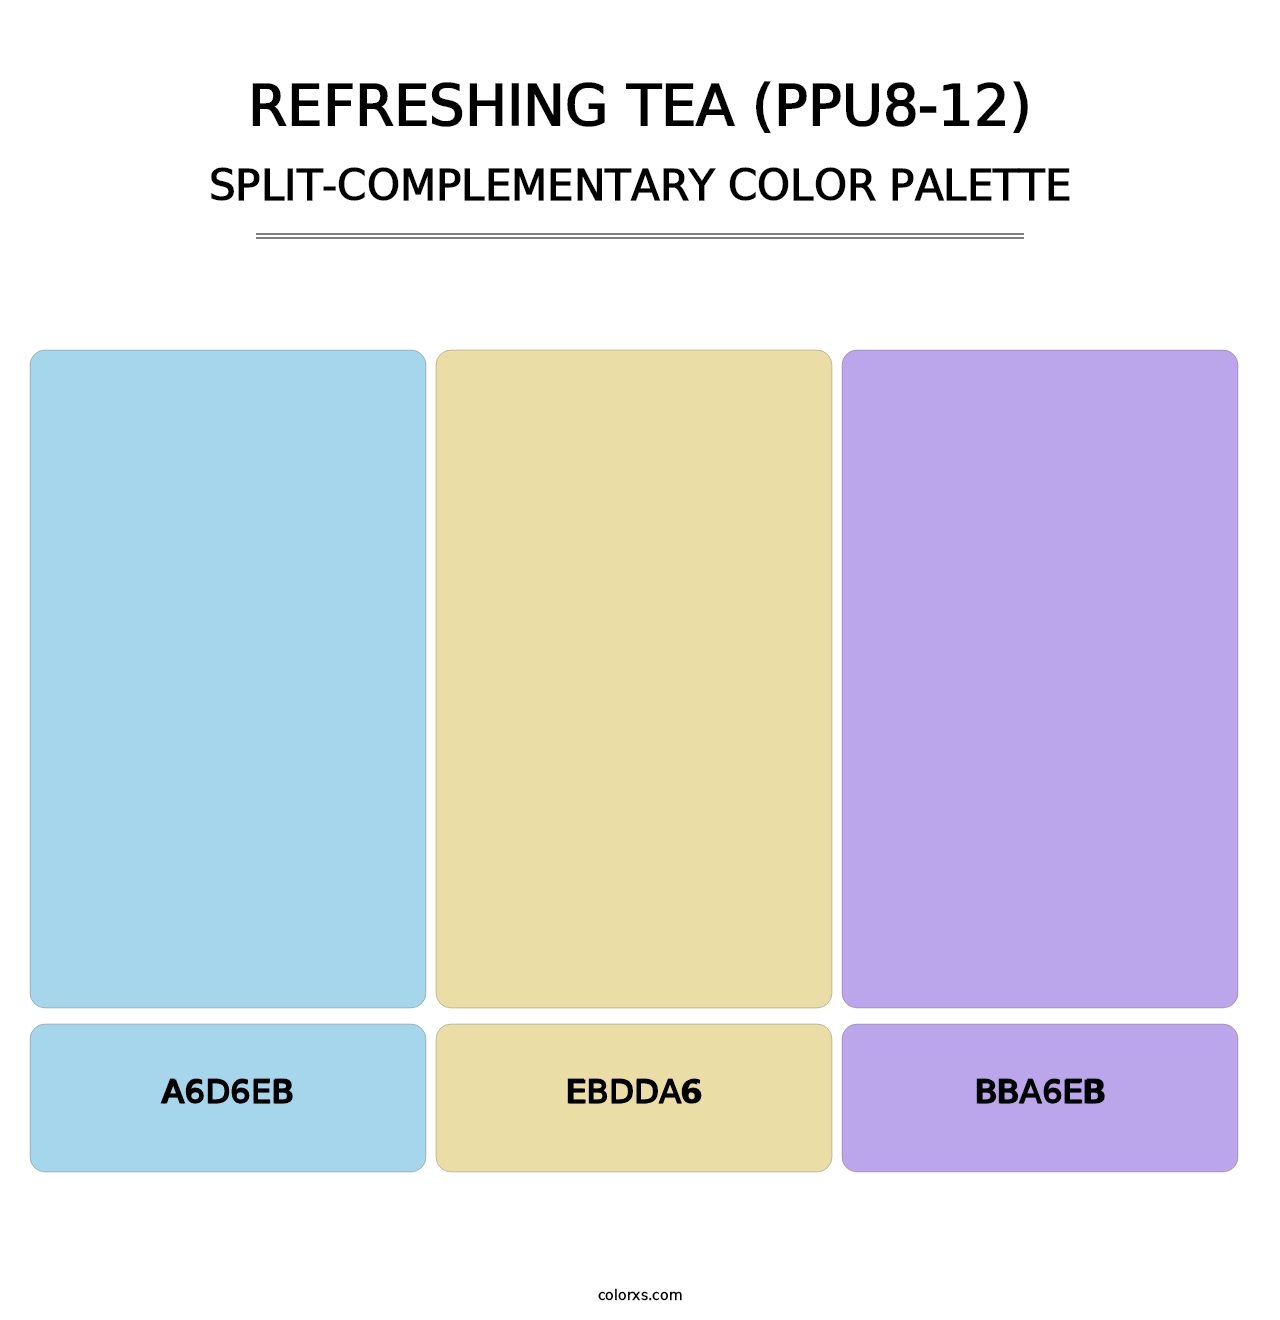 Refreshing Tea (PPU8-12) - Split-Complementary Color Palette